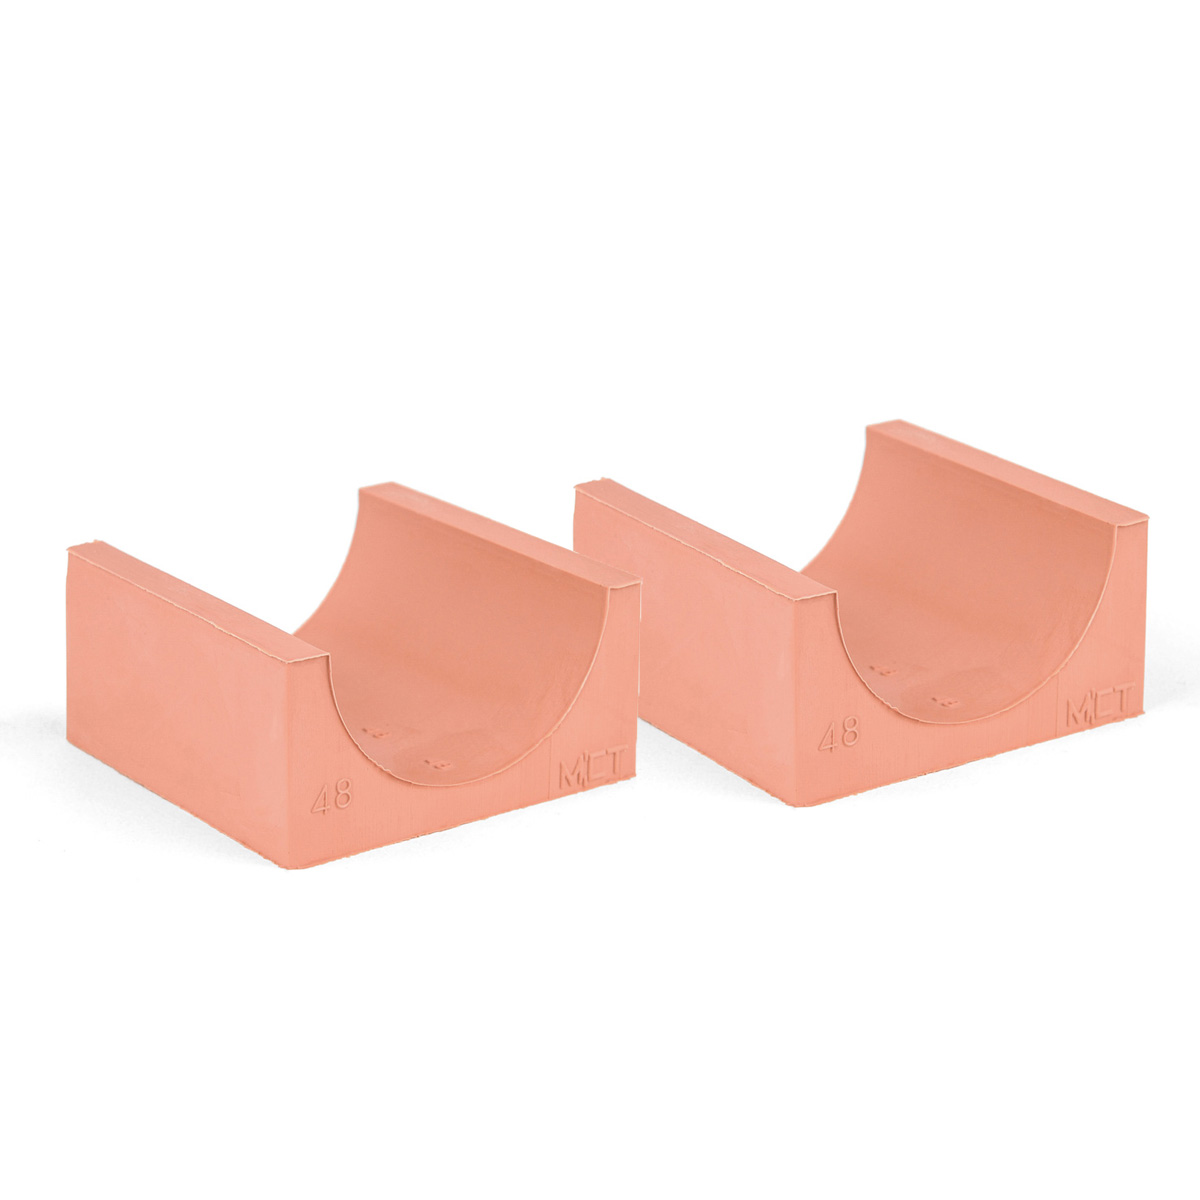 60-48*2 Set of 2 half insert block lycron, 60-48 for cable/pipe diam. 47.5-49.5mm